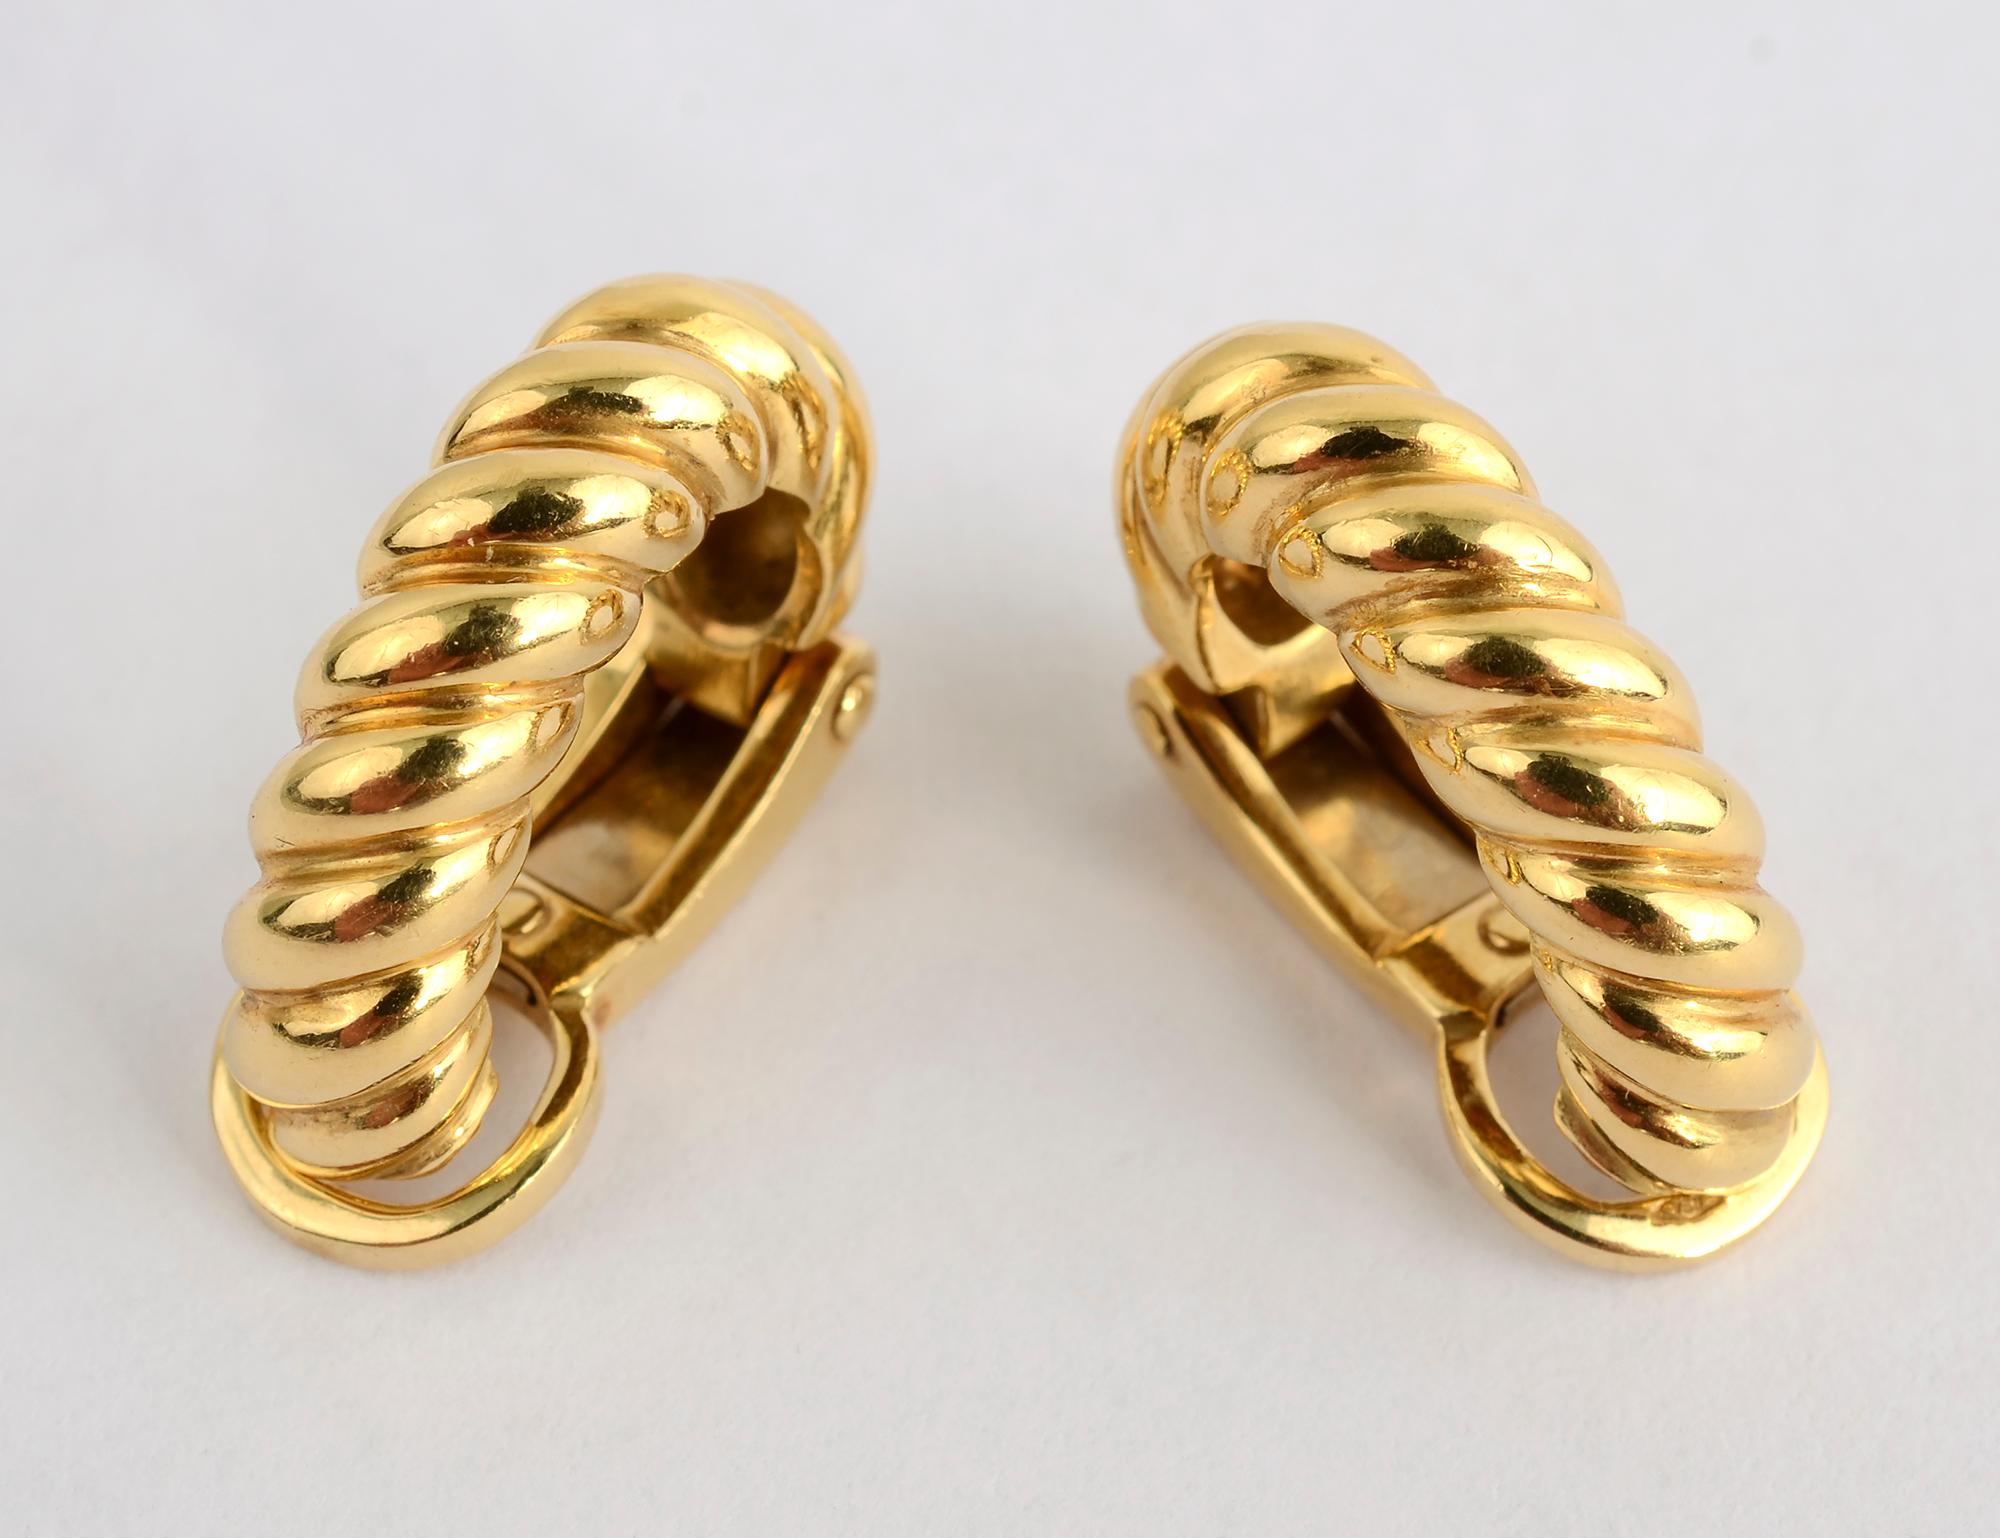 Lovely elongated half hoop earrings by Pomellato that are the perfect pair to wear all day, every day. They are of a twisted gold rope design in 18 karat gold. They are 3/4 